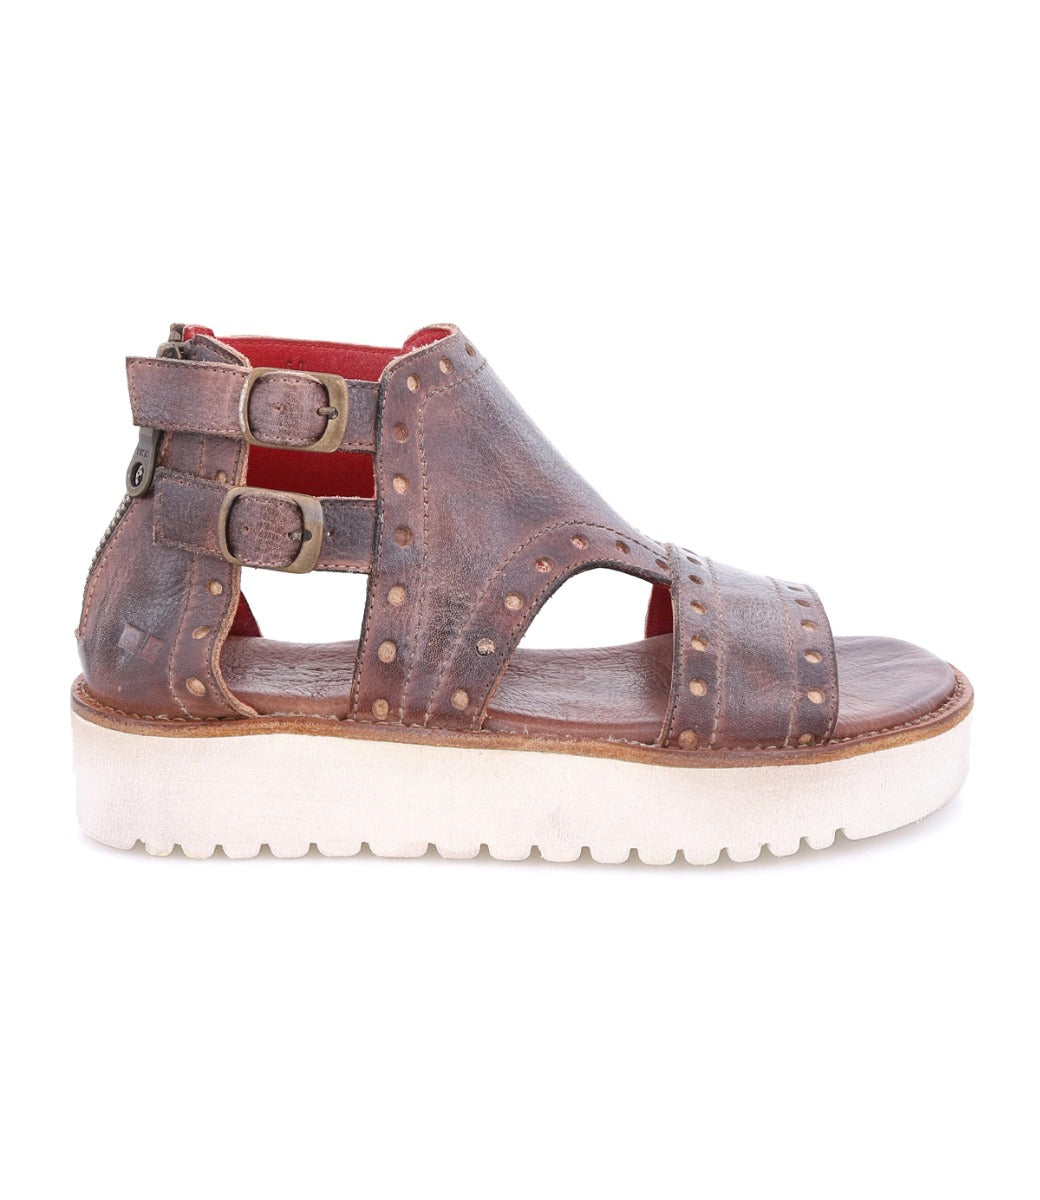 A women's brown leather Camden sandal with studs and a white sole by Bed Stu.